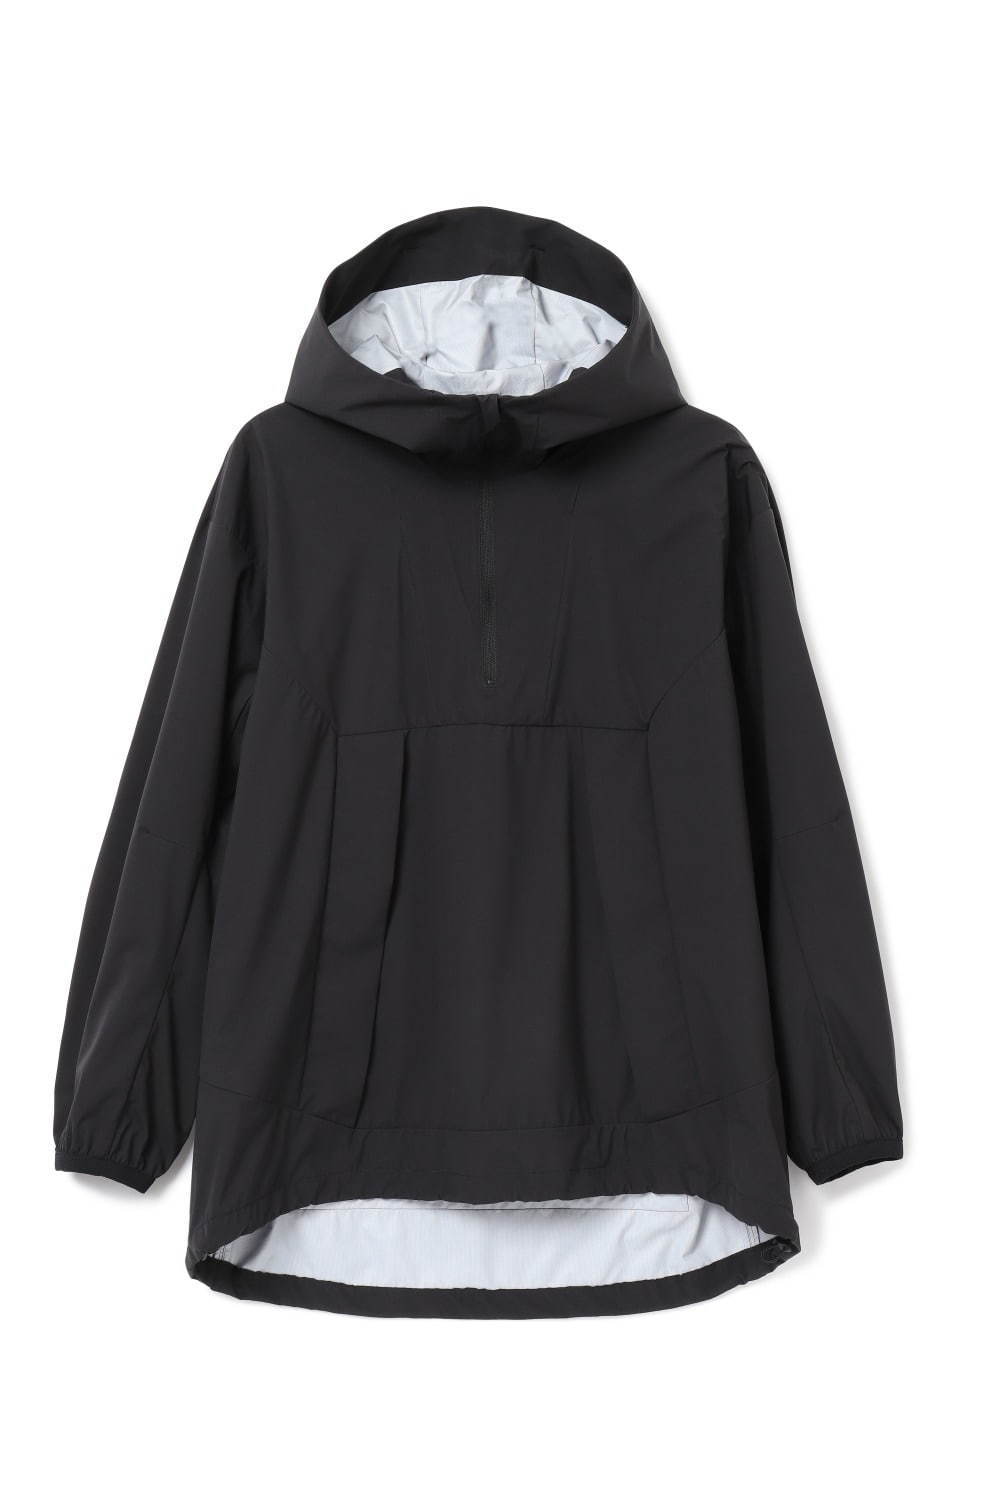 H.I.P. by SOLIDO×LEADER「3 Layer anorak parka｣56,000円＋税